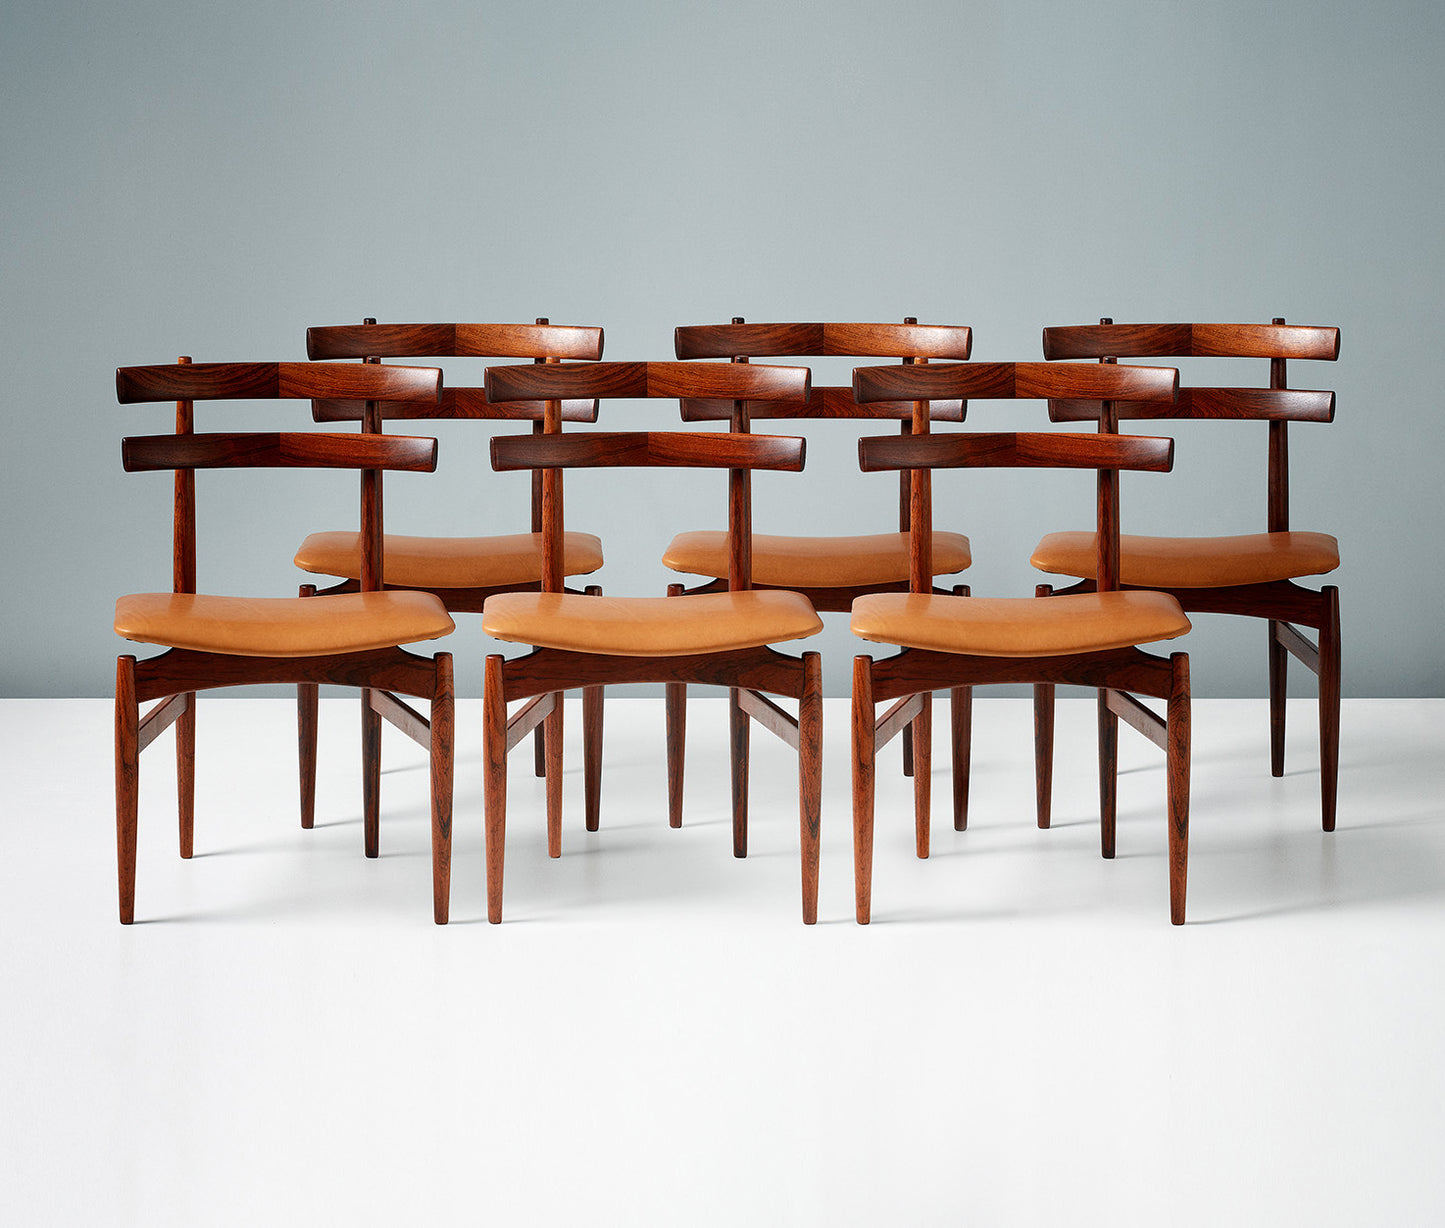 VSA-55 Dining Chairs